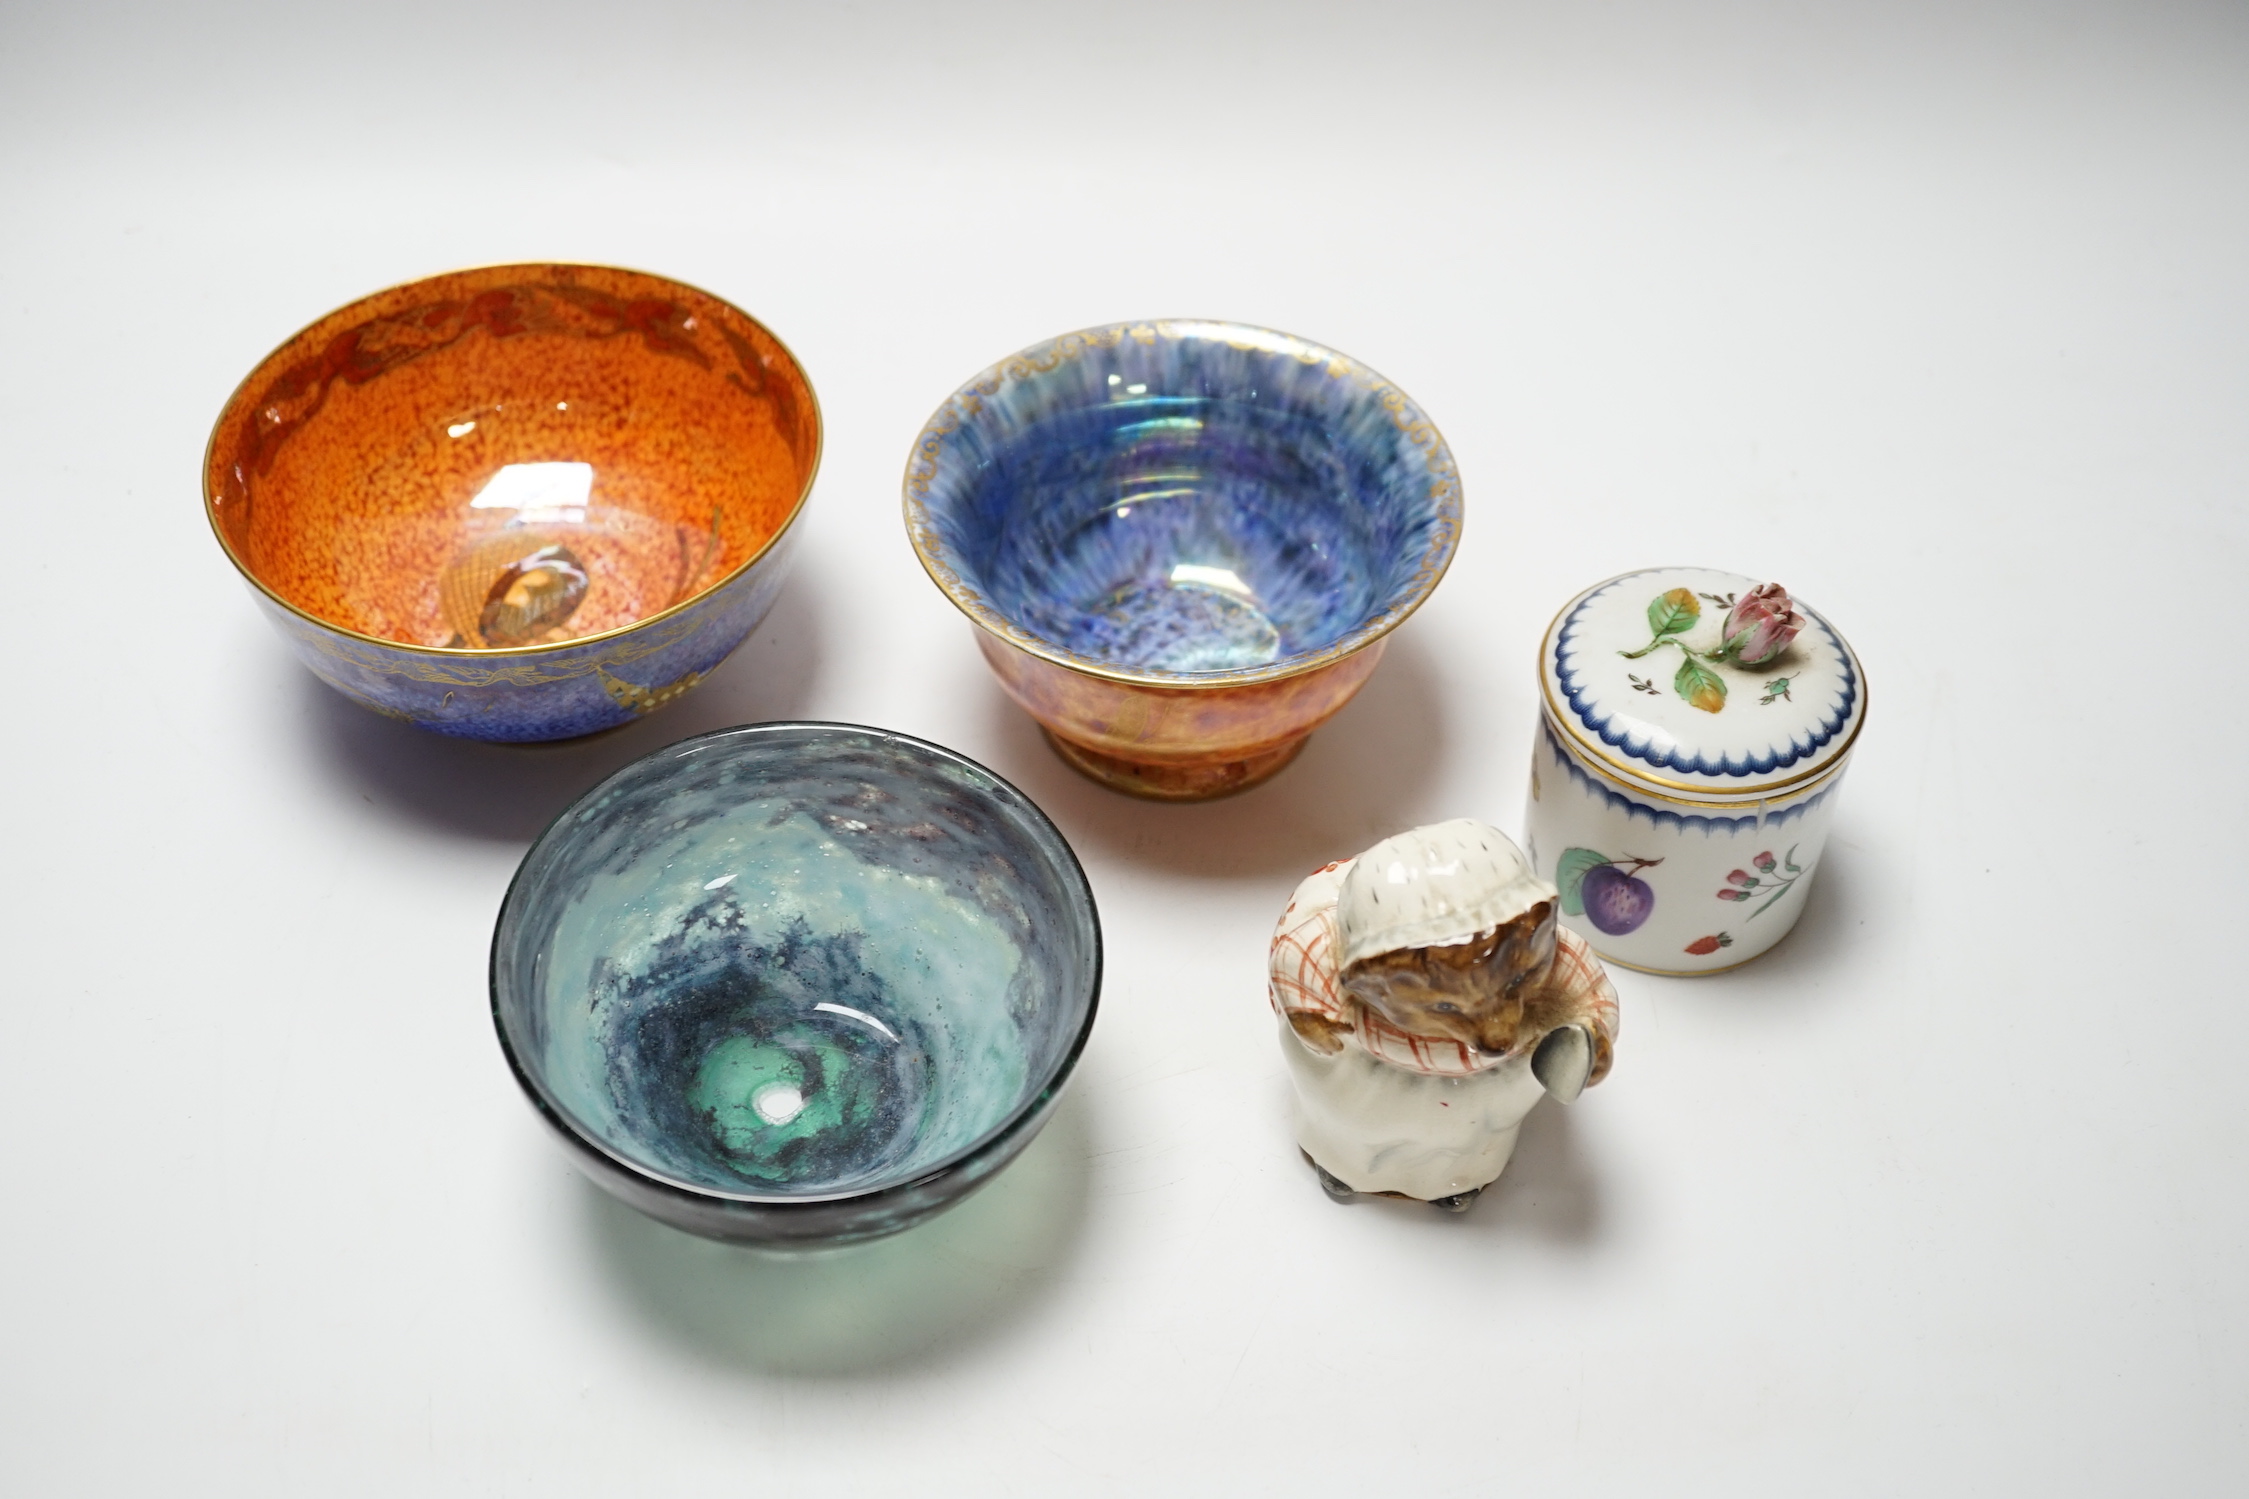 Two Wedgwood lustre bowls, a Vasart type glass bowl and two other items comprising Beatrix potter figure and Italian porcelain pot and cover, largest 13cm in diameter